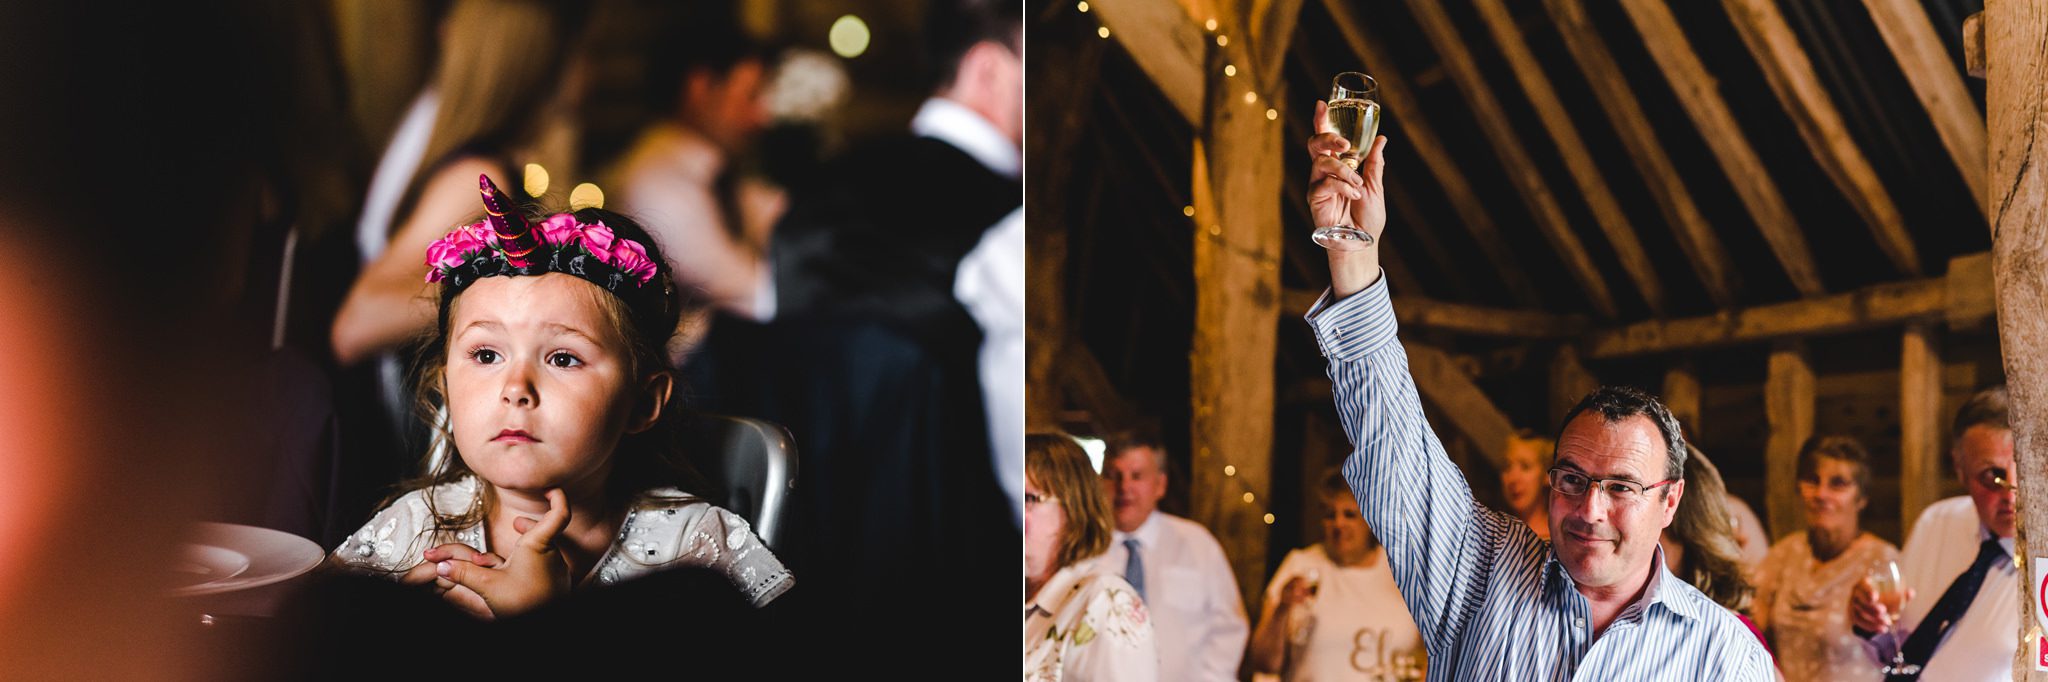 Wedding speech reactions at cold harbour barn